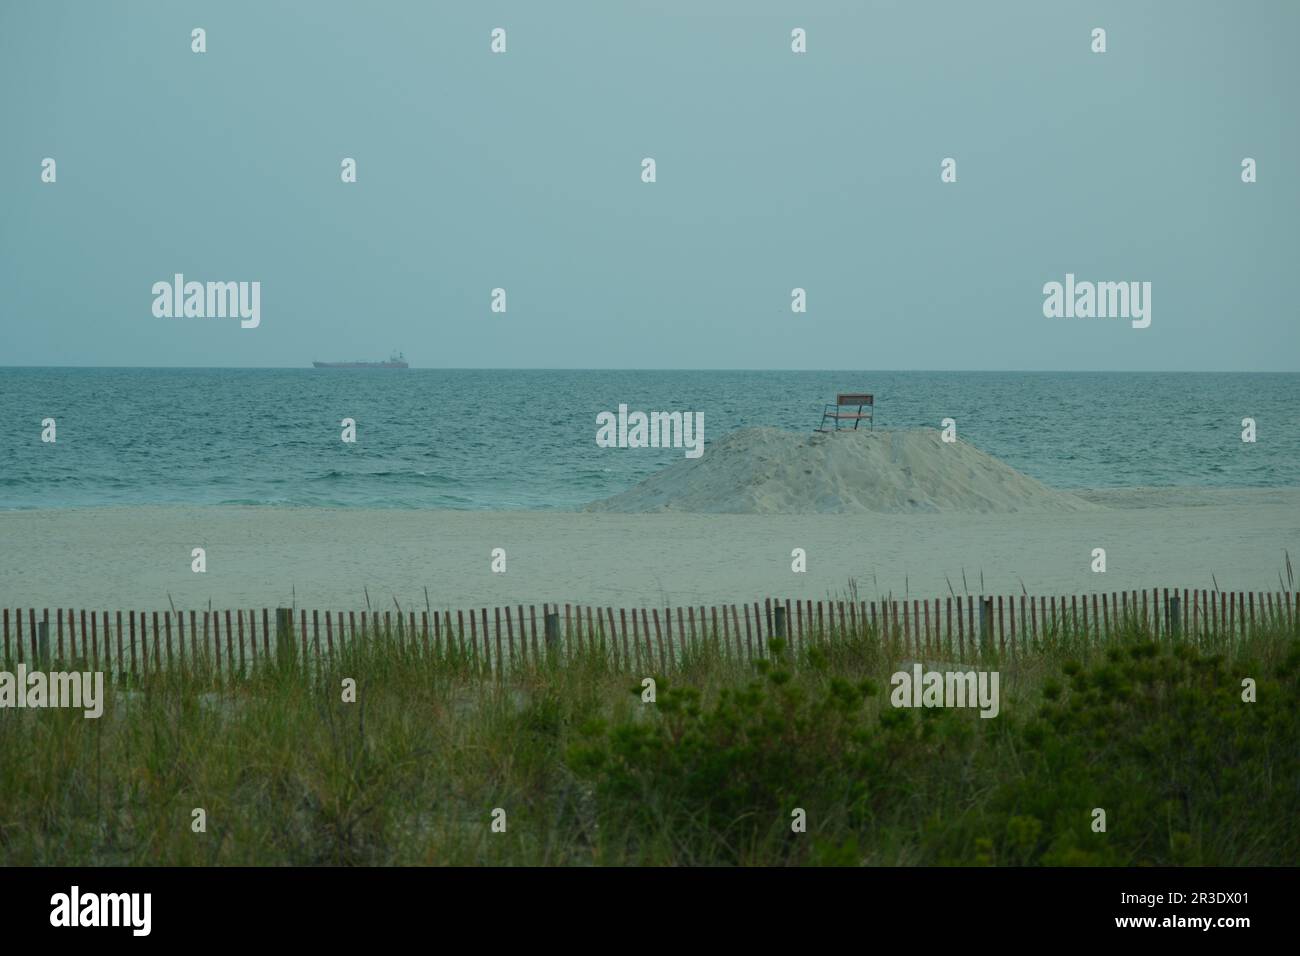 View of the ocean with a bench on a mound of sand, Long Beach, New York Stock Photo